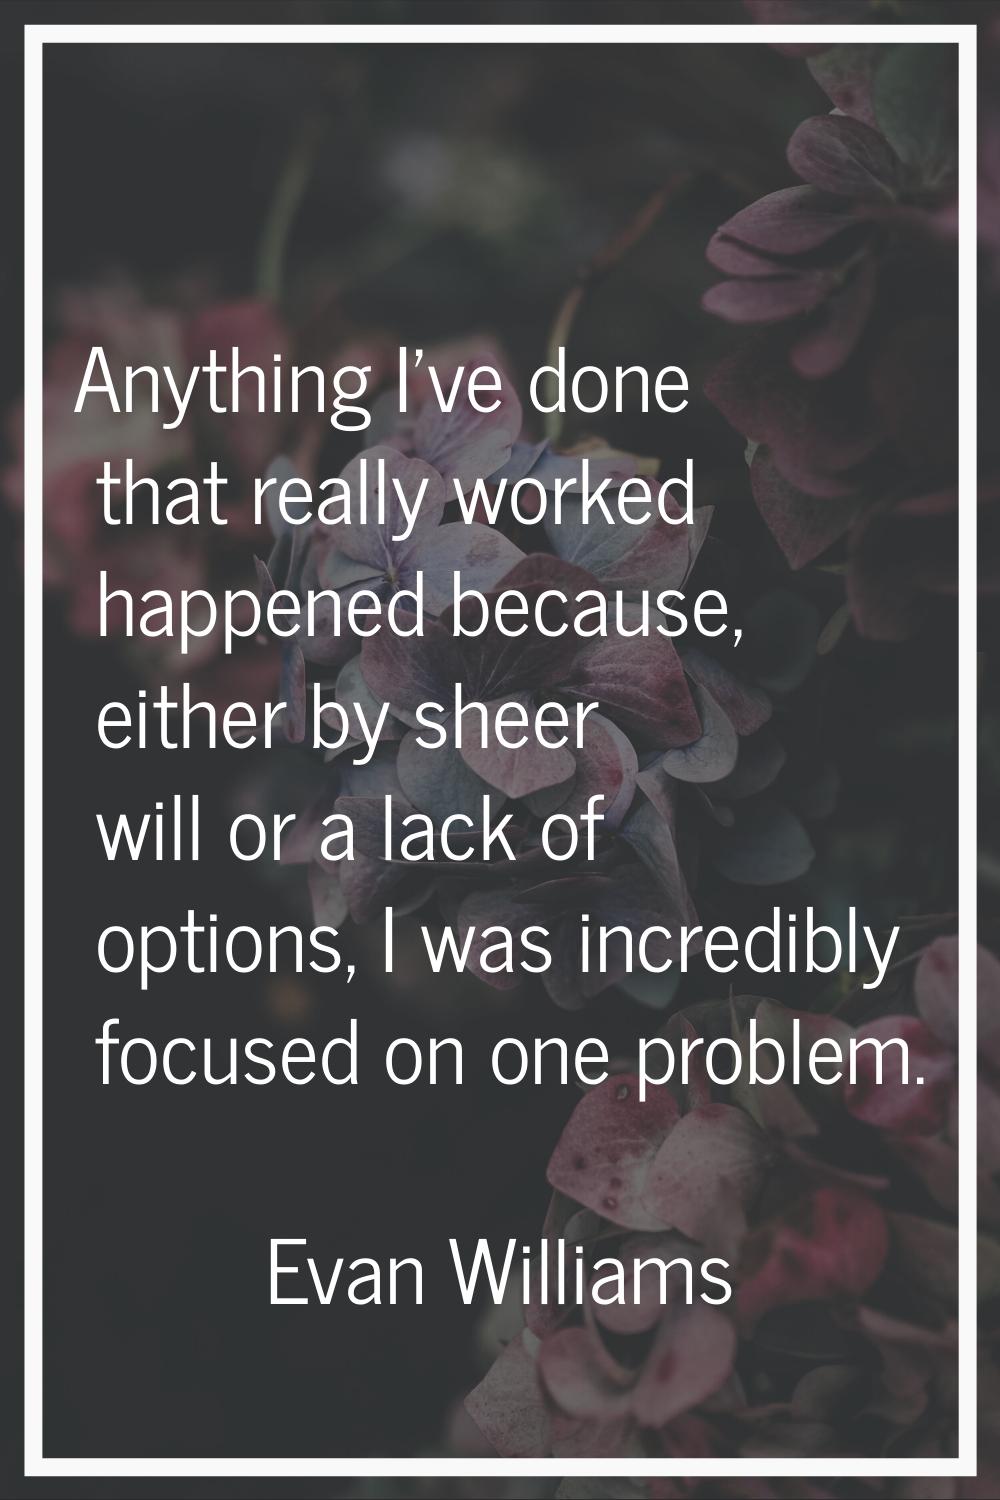 Anything I've done that really worked happened because, either by sheer will or a lack of options, 